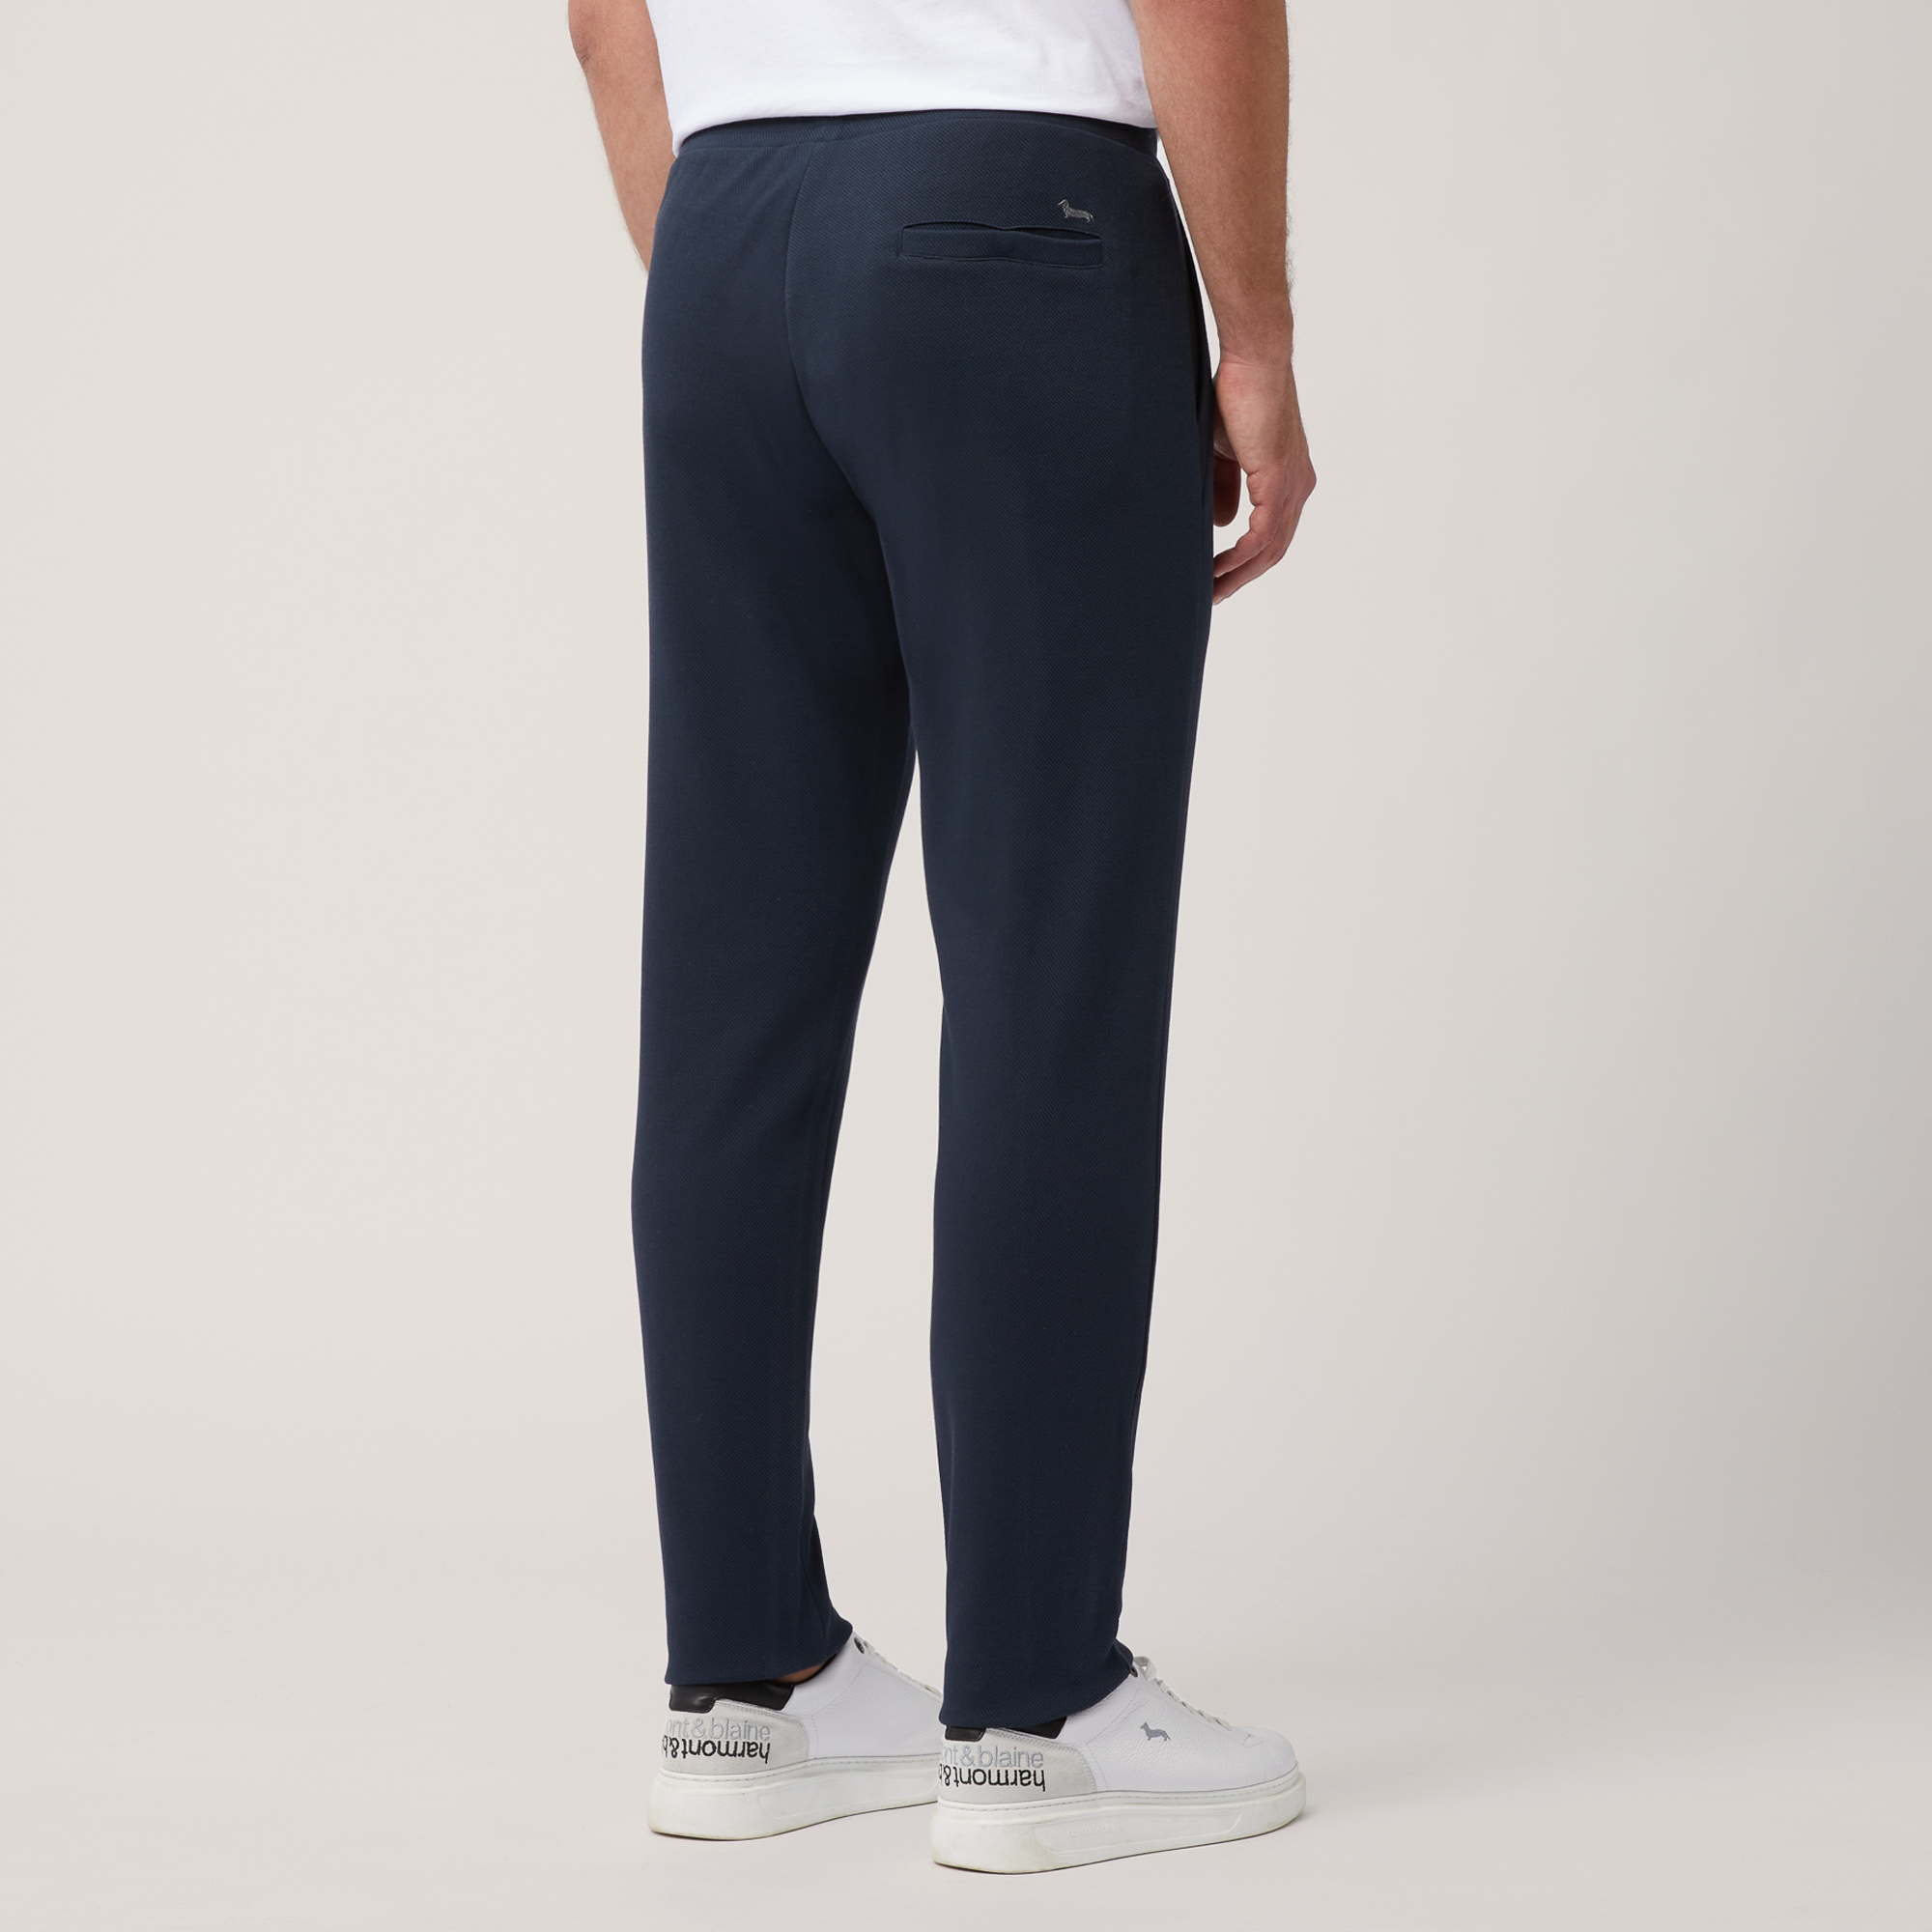 Pantalone In Cotone Stretch Con Tasca Posteriore, Blu Navy, large image number 1